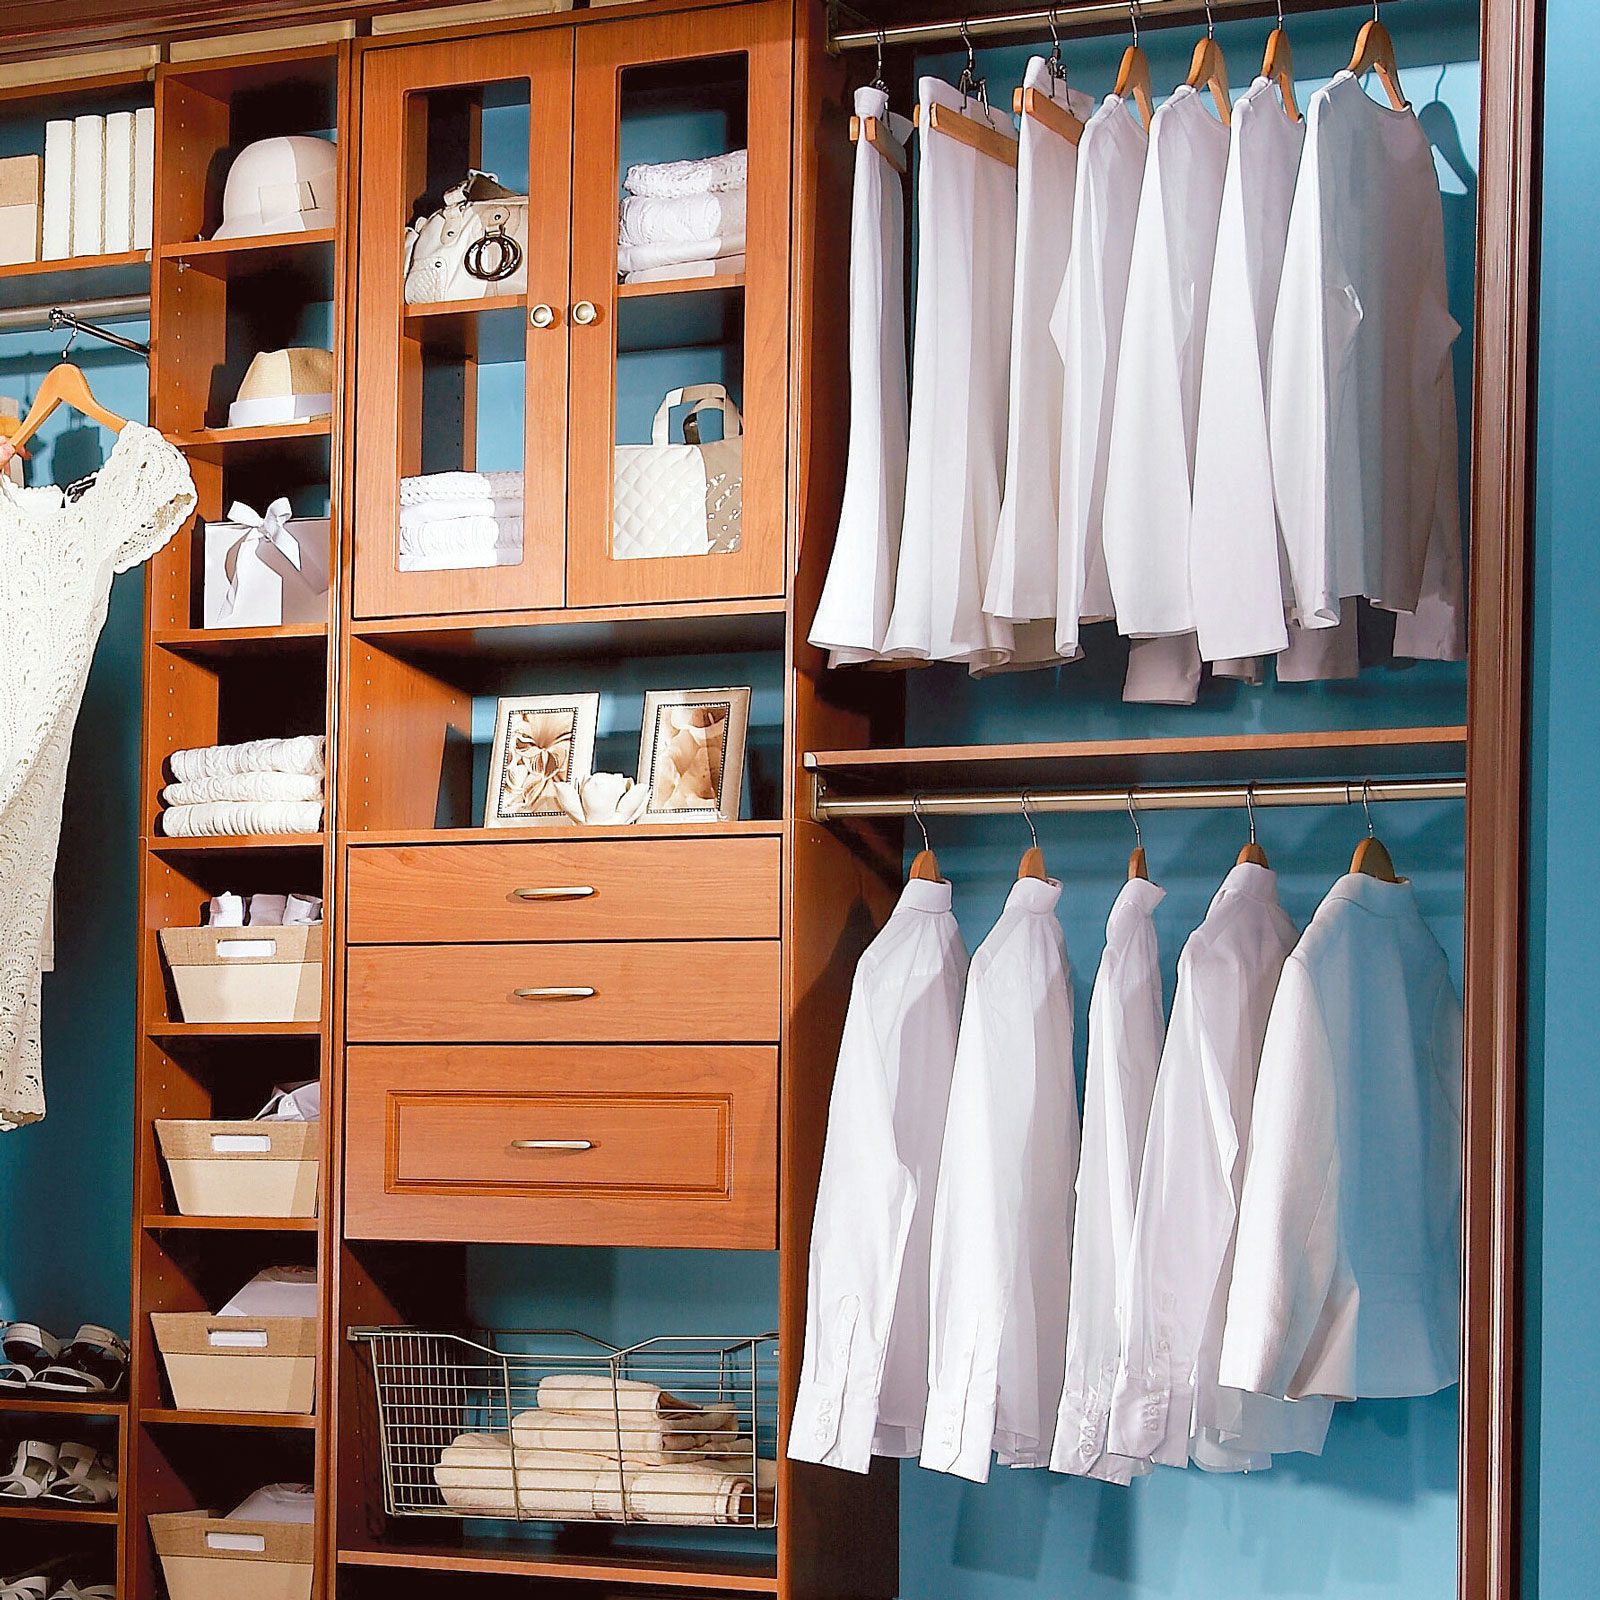 11 Tips For Buying and Assembling a Closet Storage System